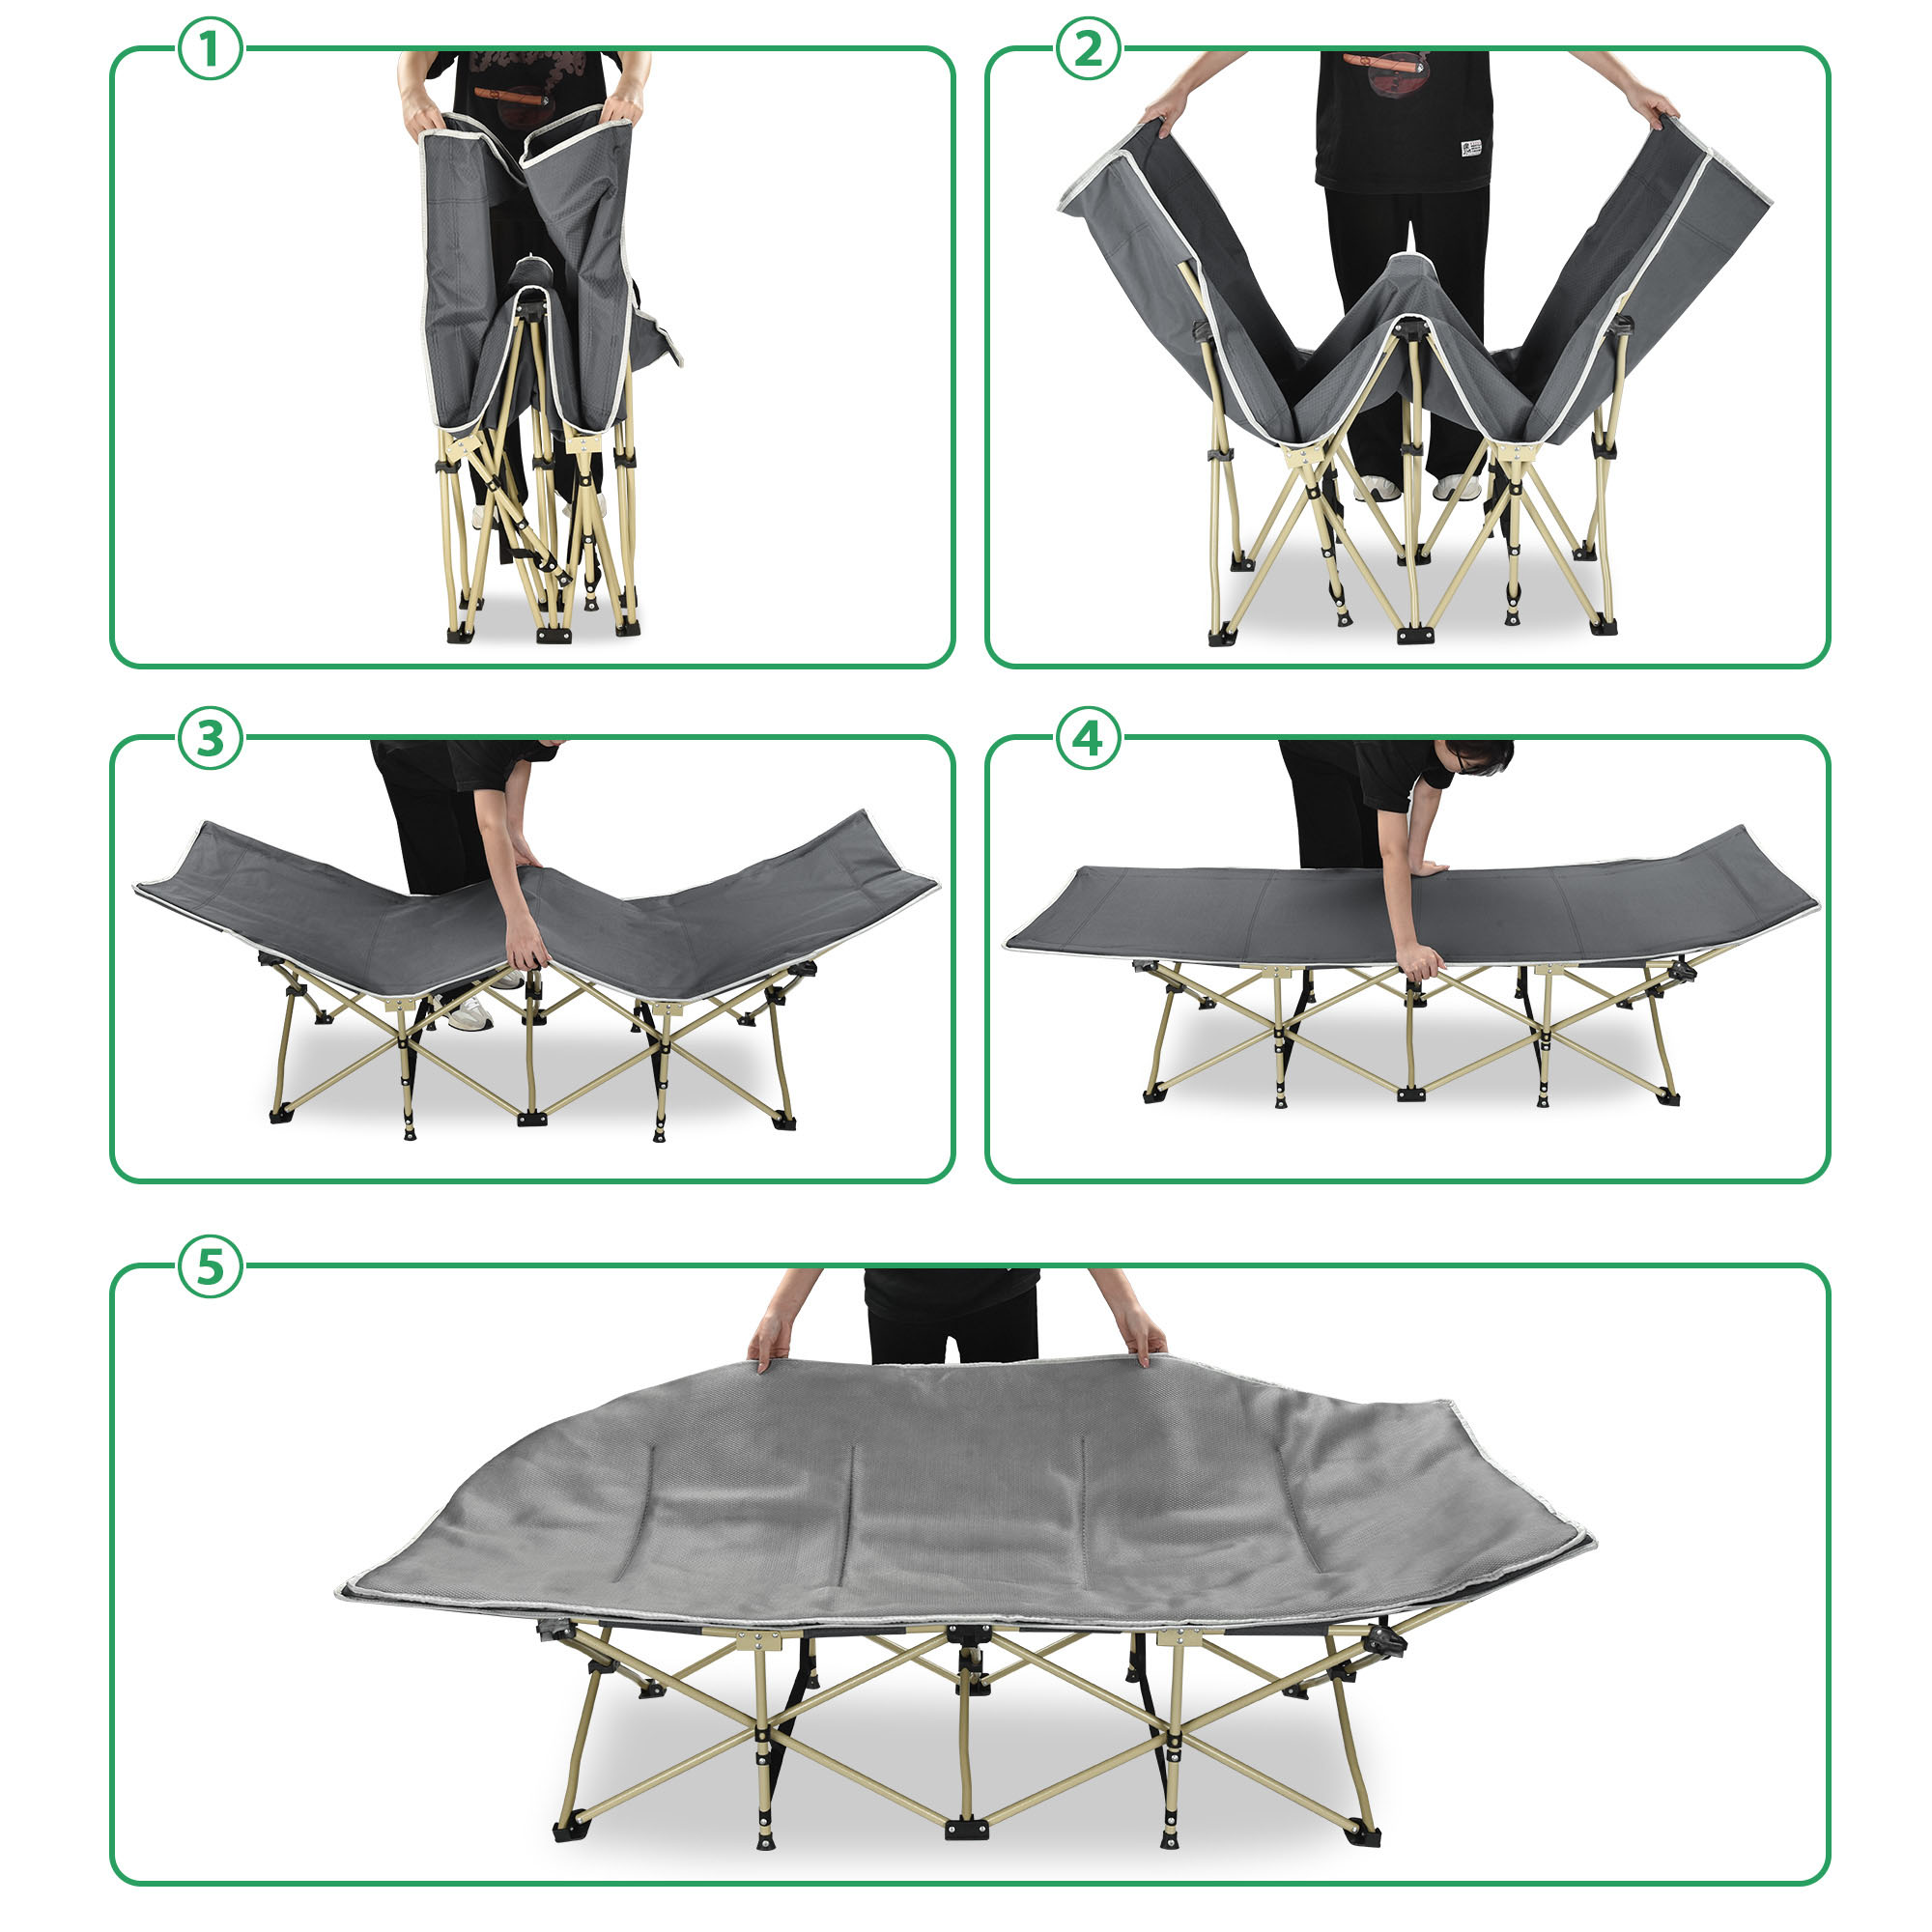 Yescom Folding Cot Collapsible Camping Bed with Carrying Bag Travel Outdoor Yard 2 Pack